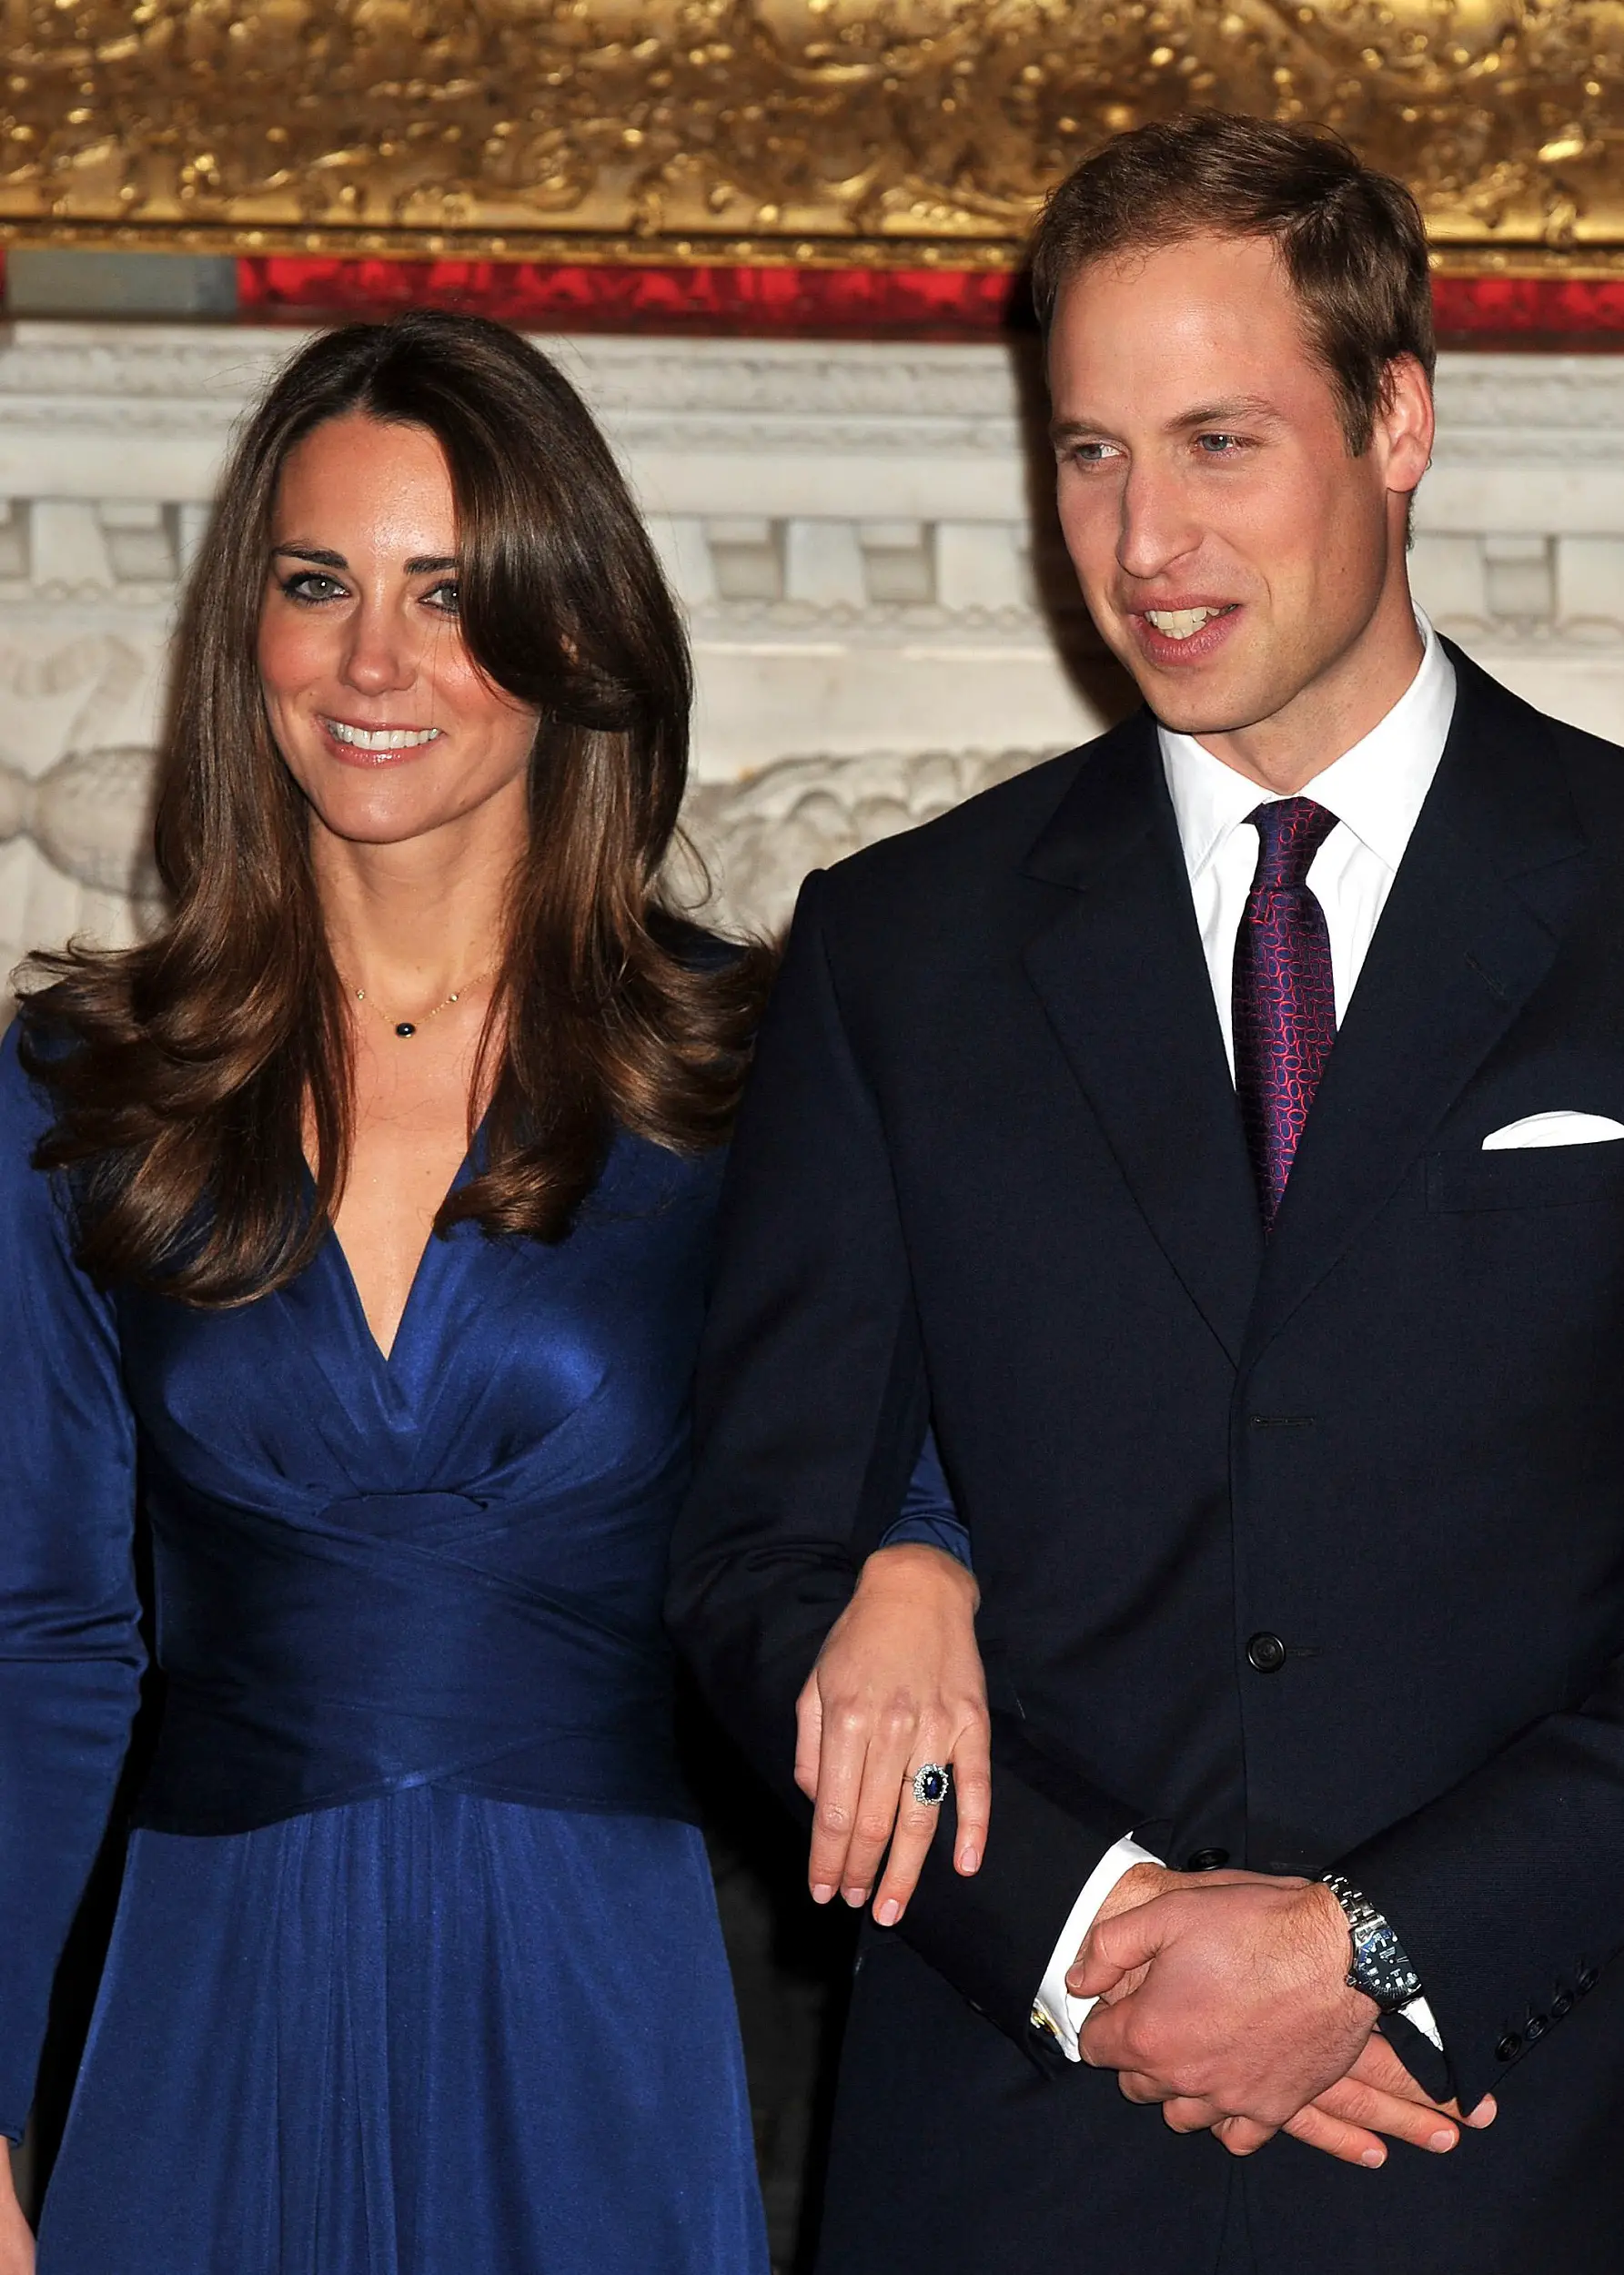 Prince William and Kate Middleton engageent annoucement